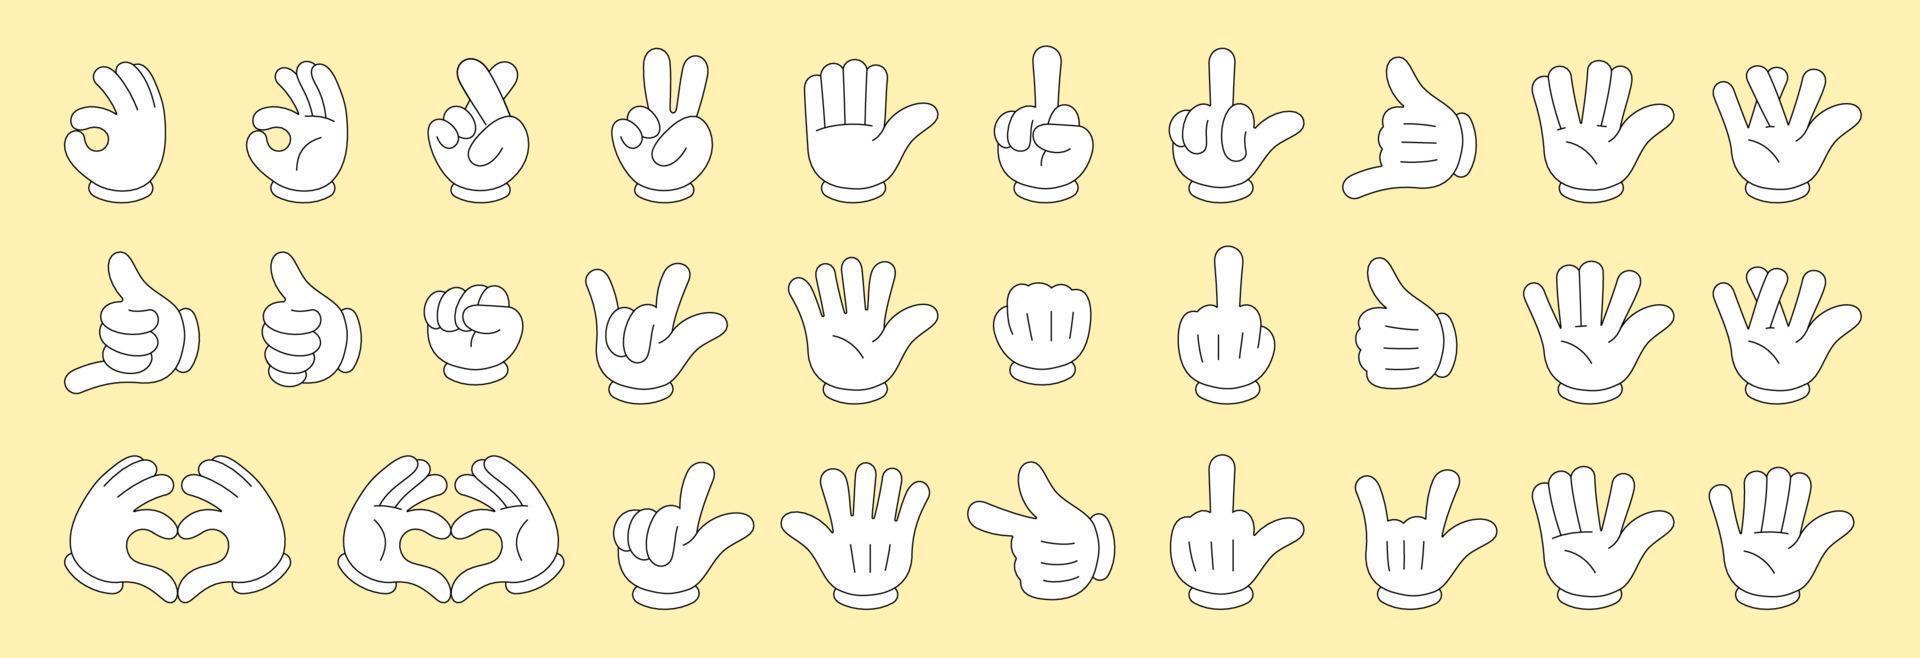 Retro groovy style hands set. Cartoon hippie hand collection. Vintage hippy various palm sticker pack. Showing gestures victory, shaka, ok, rock and love. Abstract trendy y2k vector eps illustration